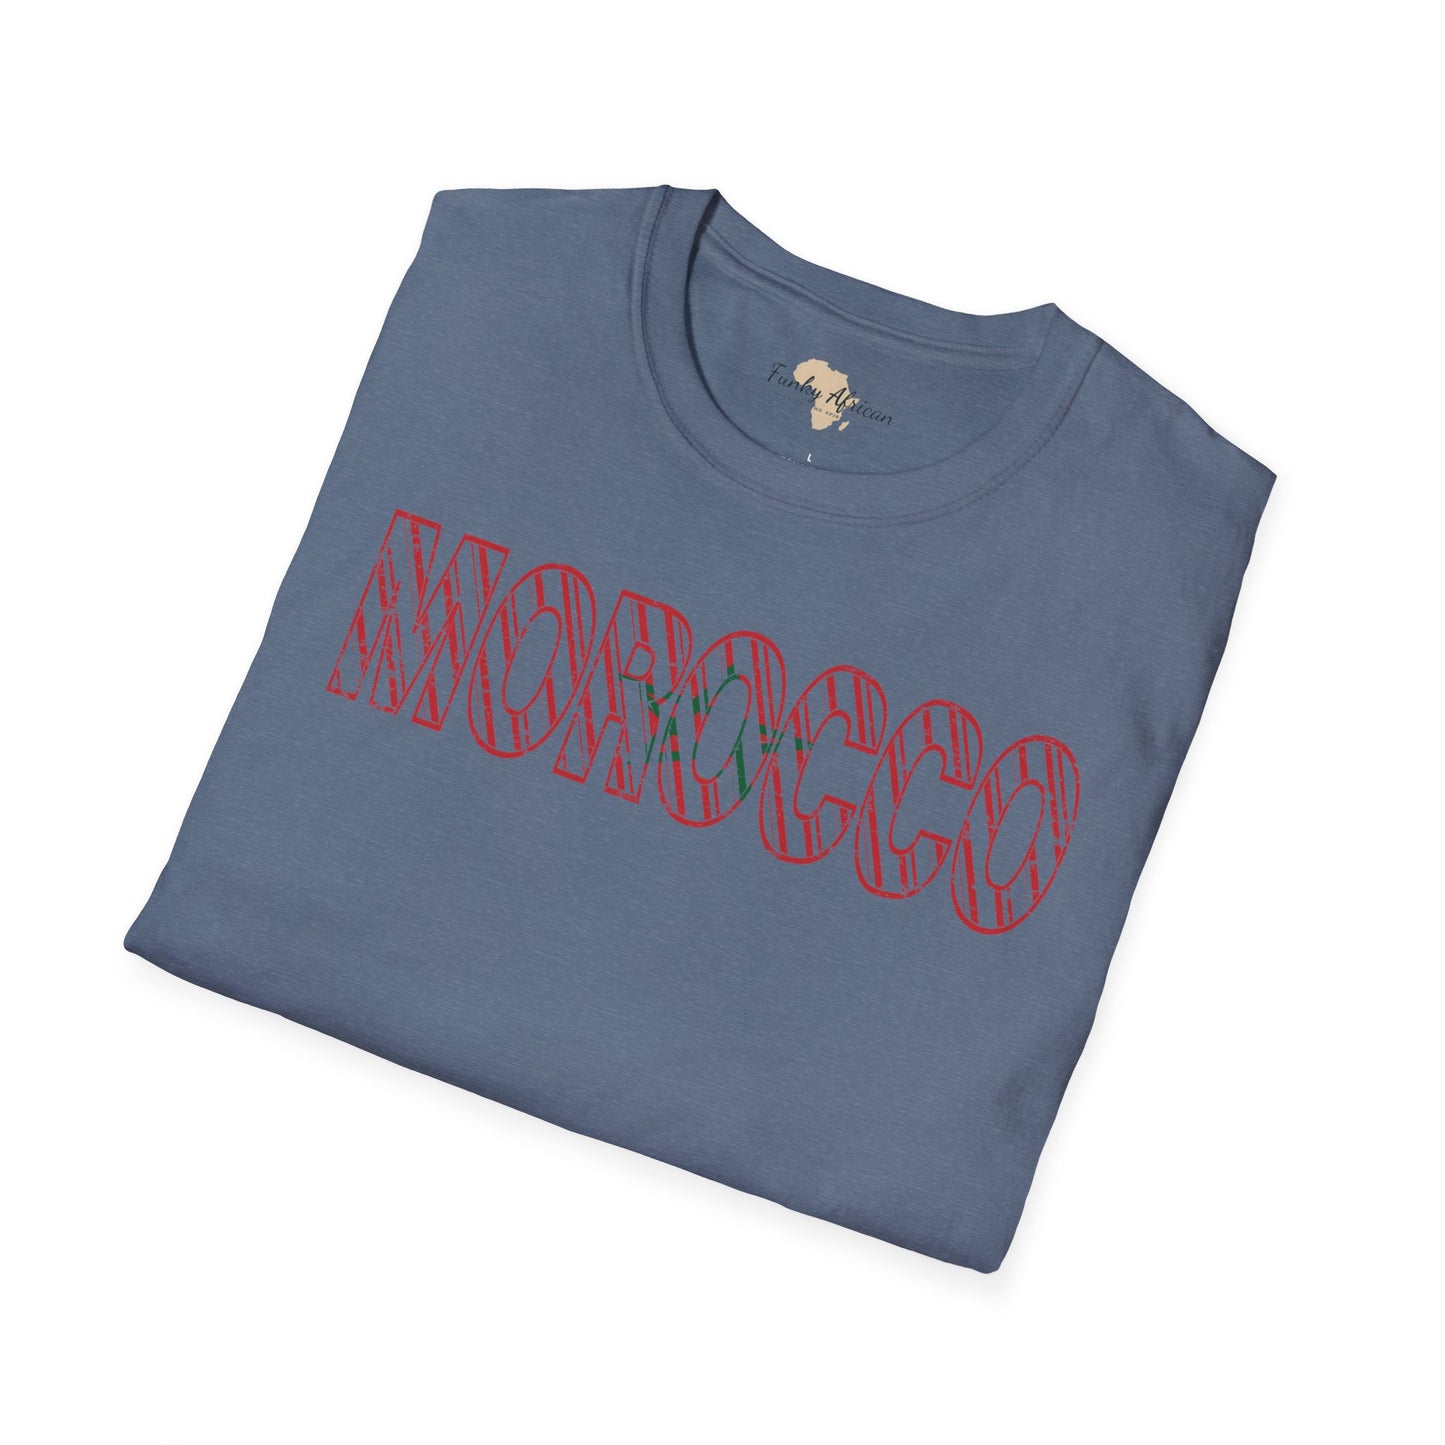 Morocco text unisex softstyle tee